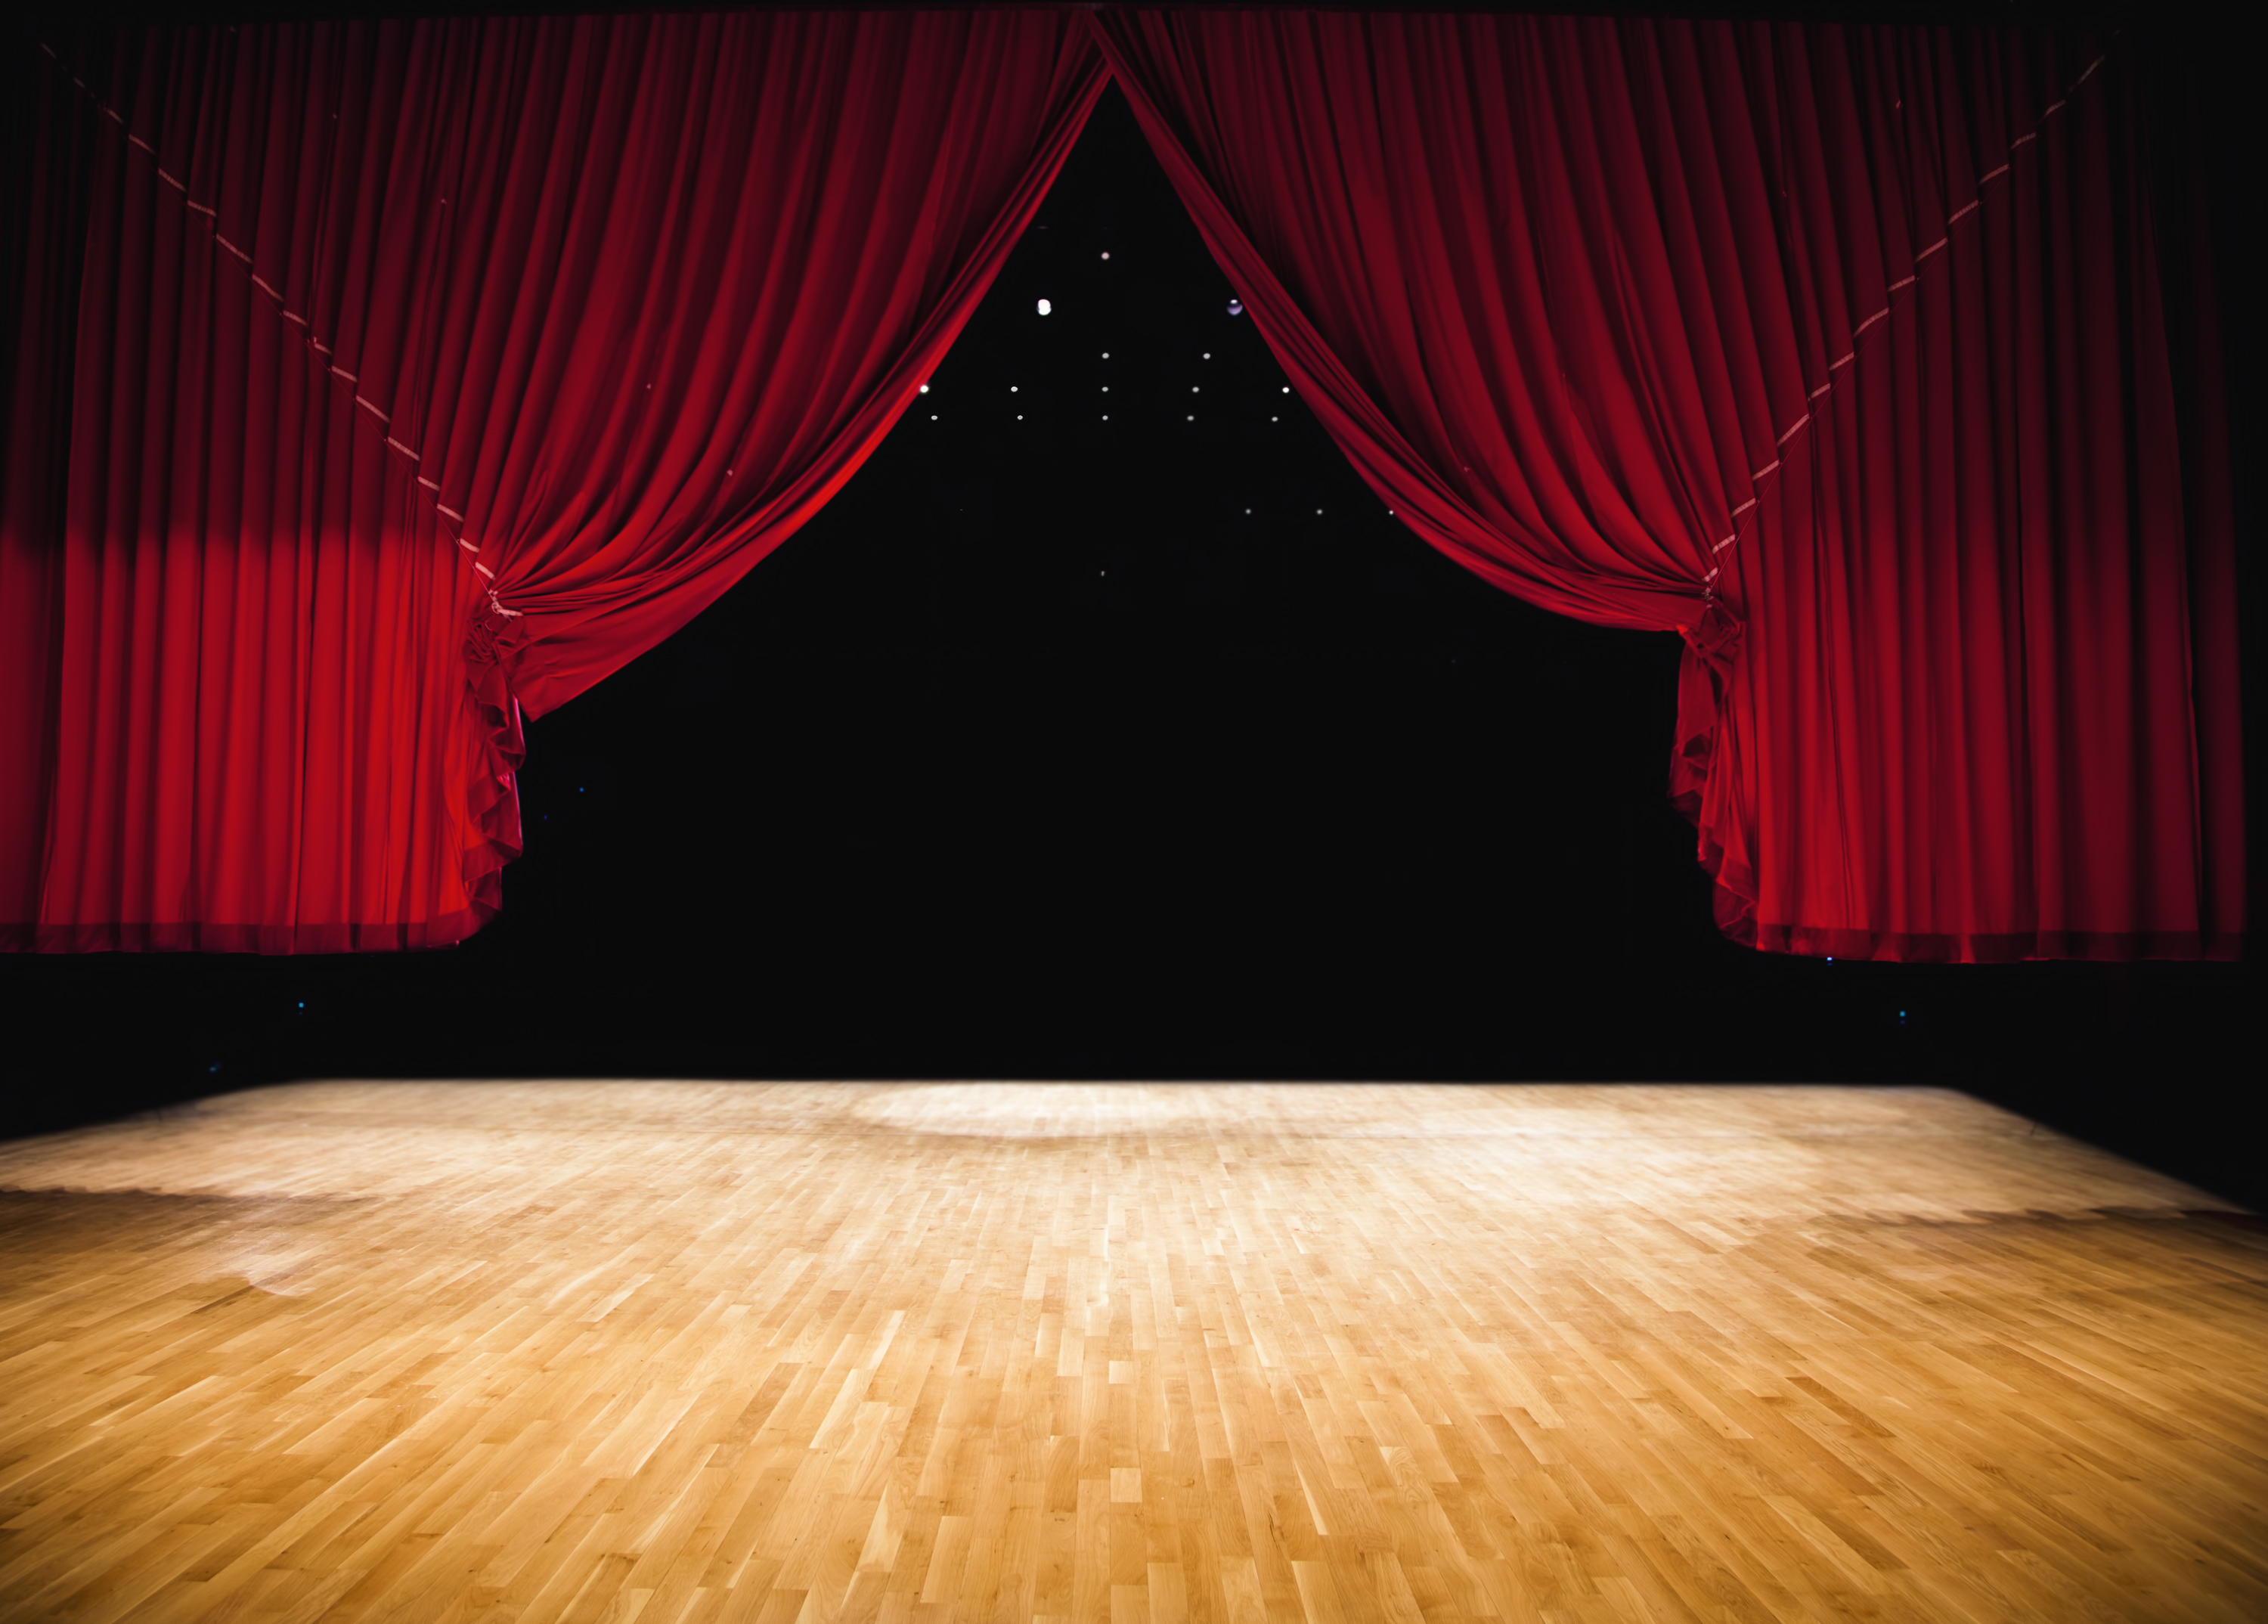 stage curtains